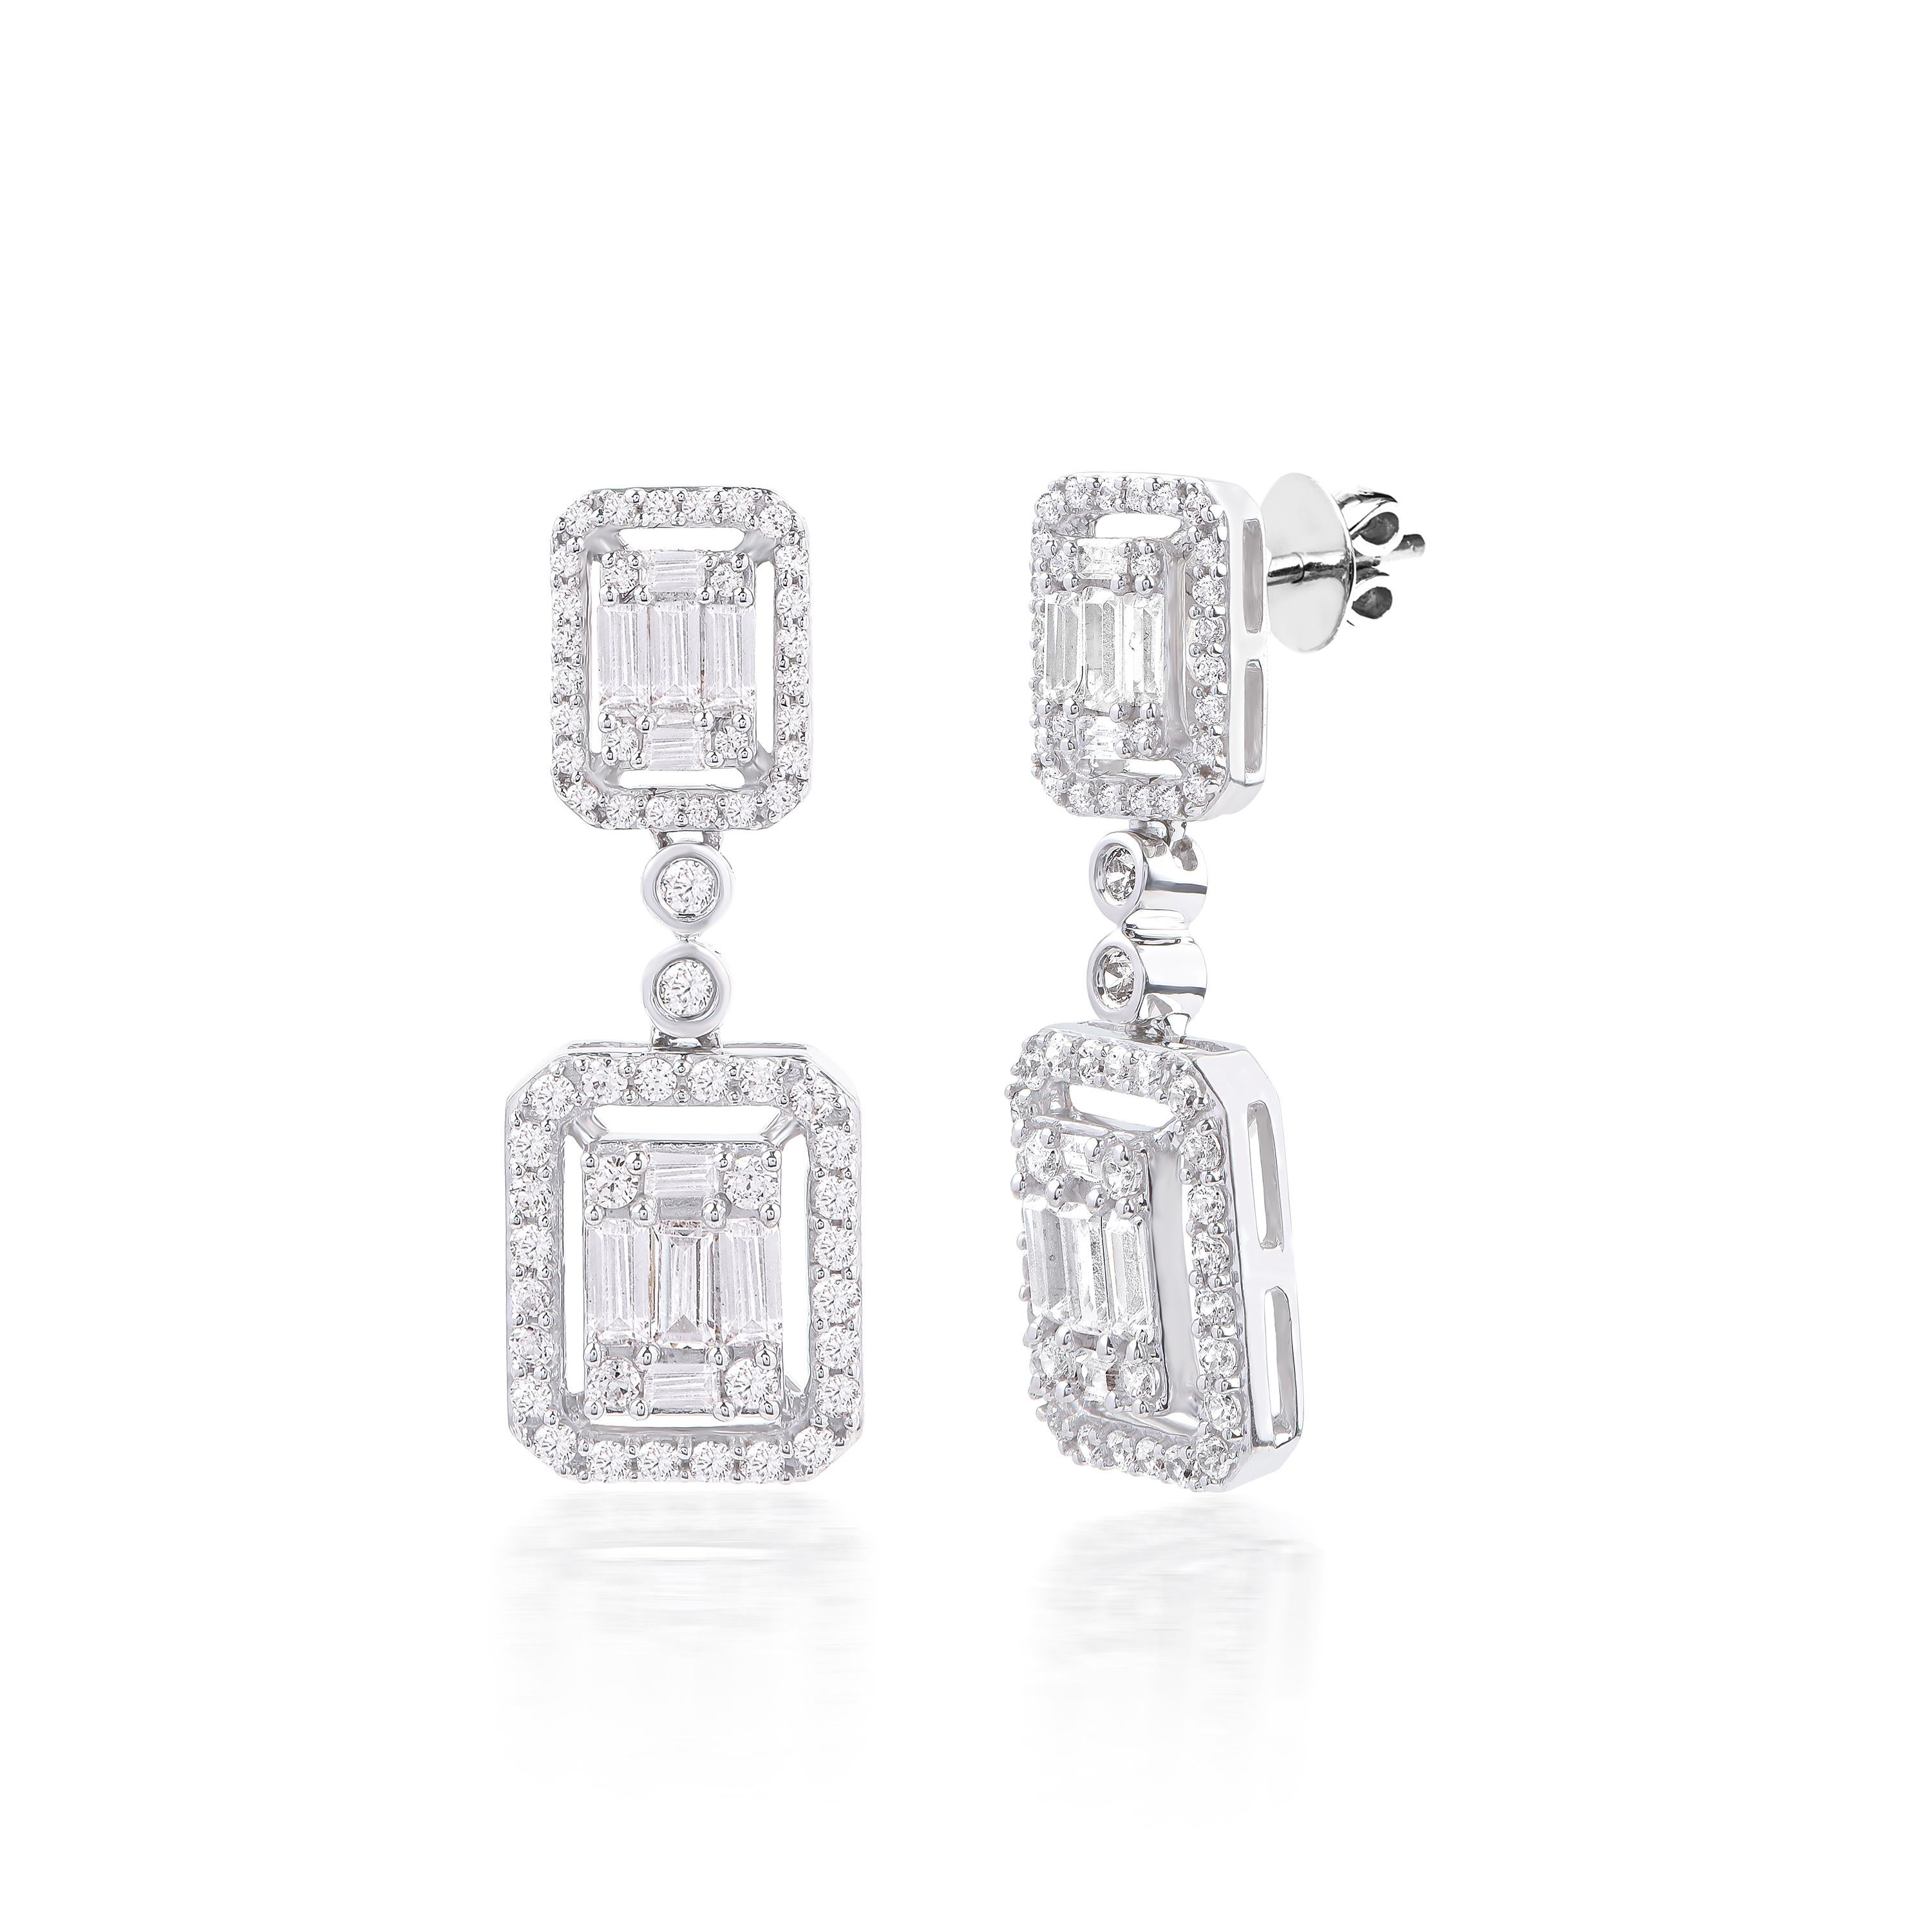 Embedded with 116 brilliant-cut diamonds and 20 Baguette diamonds in prong and bezel setting and designed in 18-karat white gold. The diamonds are graded H-I Color, I2 Clarity. 

We can customized these earrings in yellow or rose gold as well.